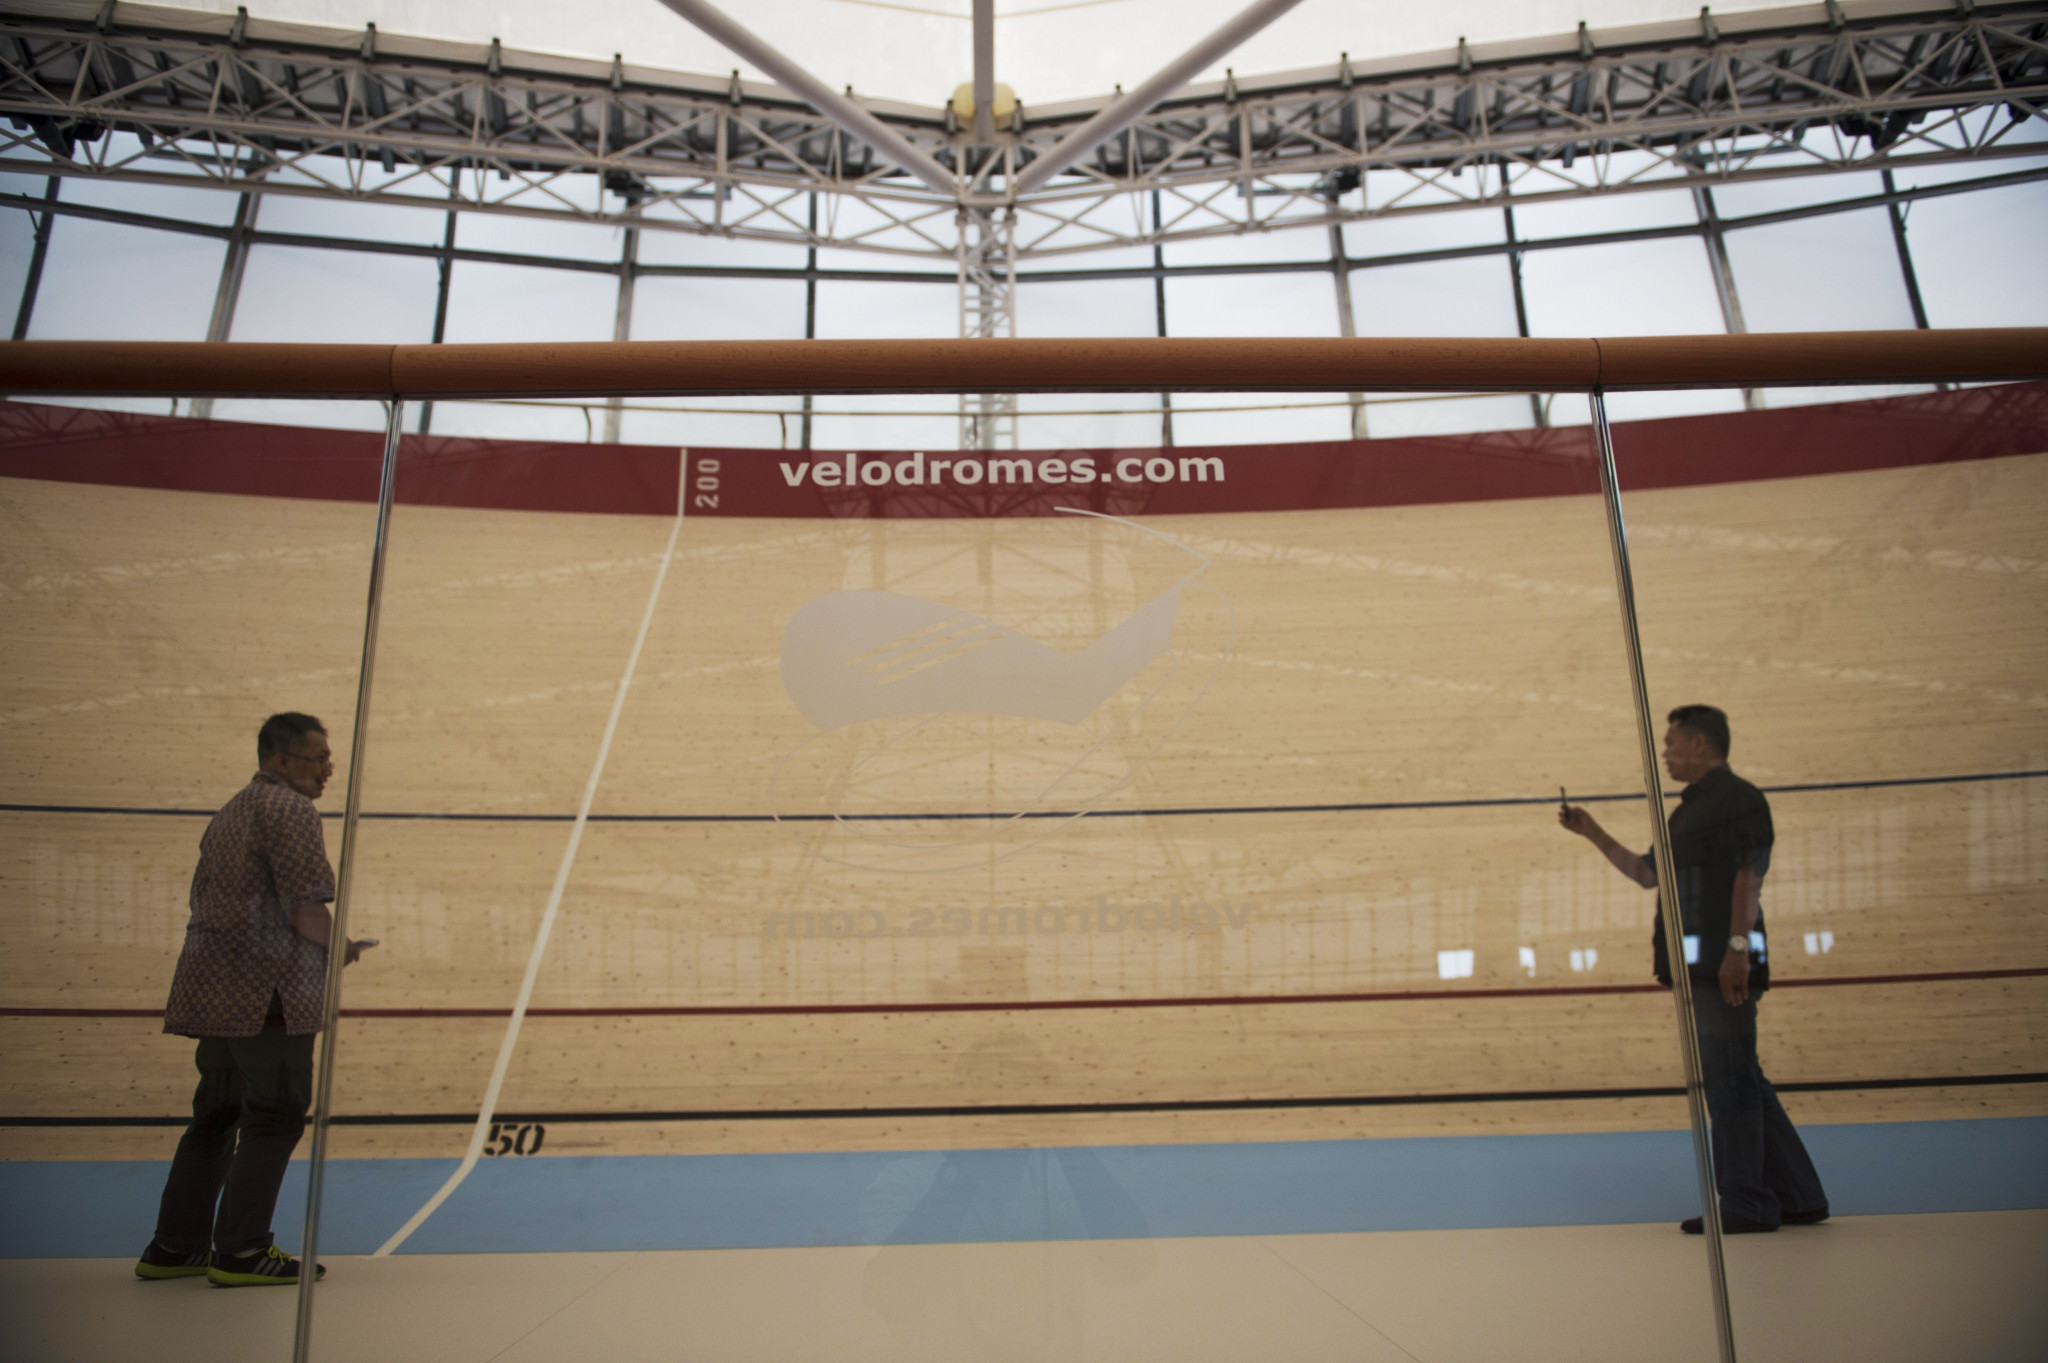 The velodrome has been constructed for the Asian Games ©Getty Images